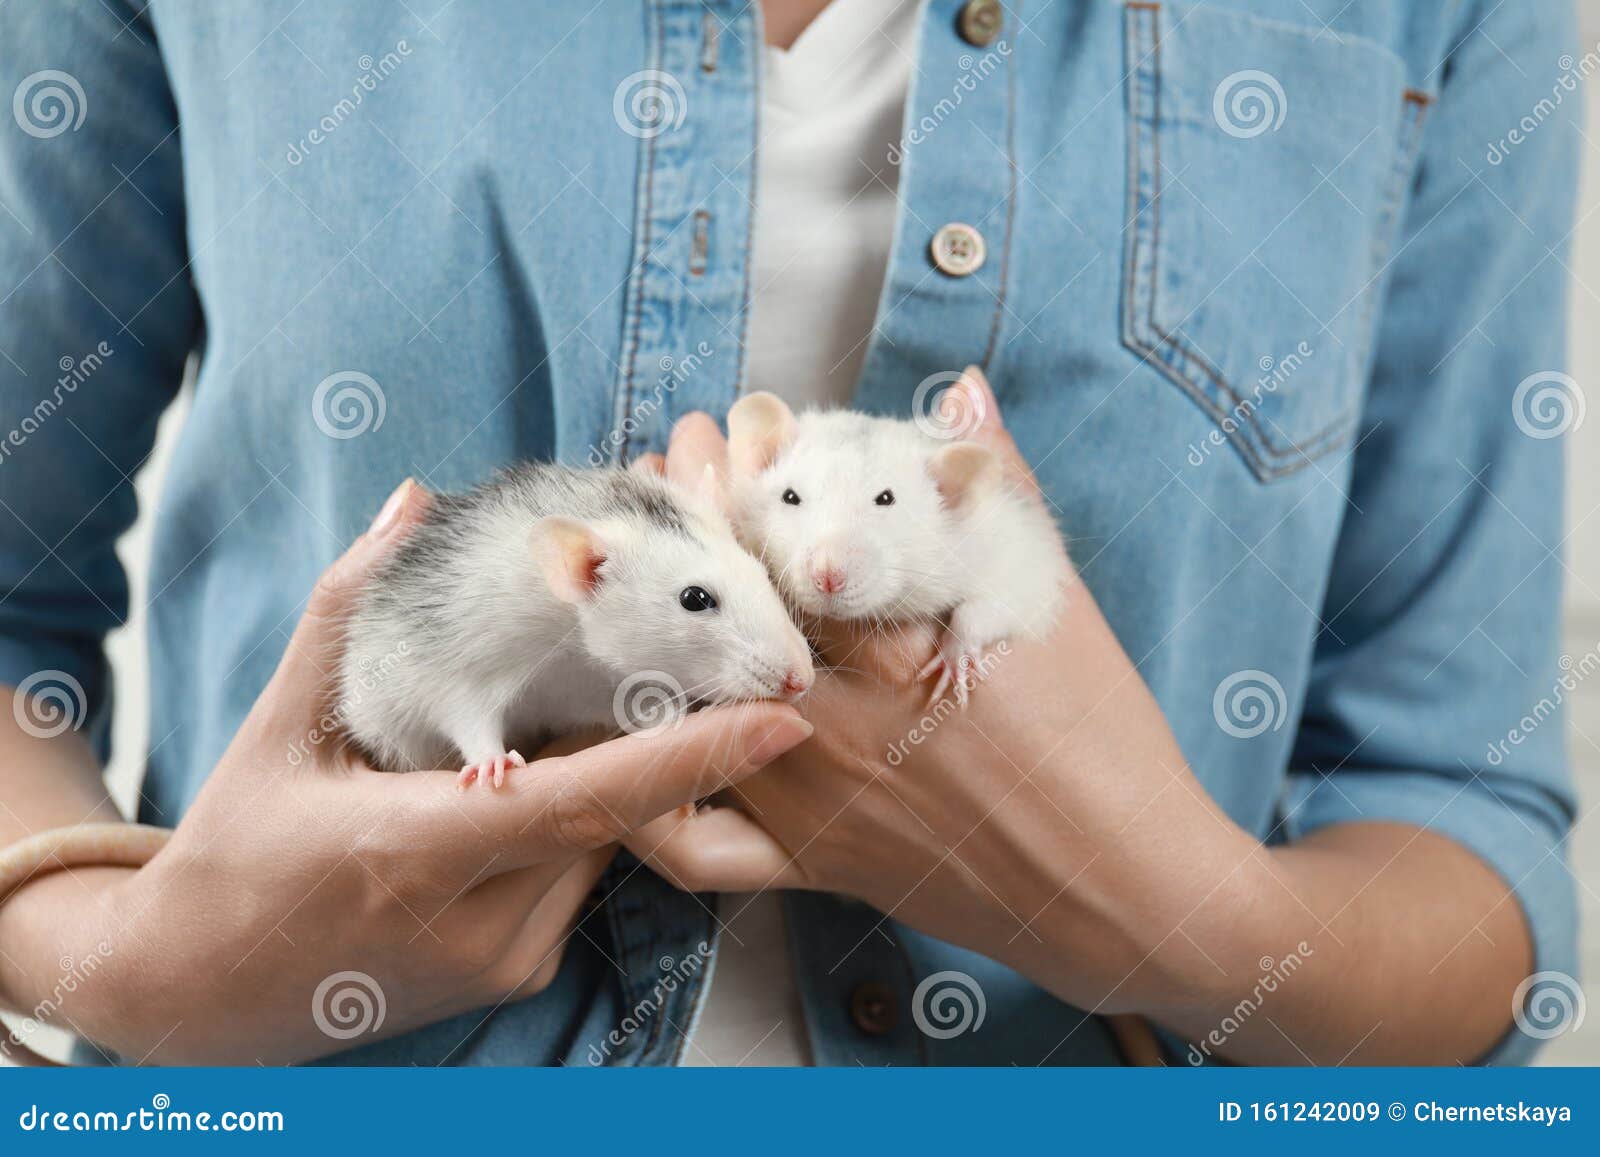 Man holding a tiny, beautiful hamster Stock Photo by ©fantom_rd 100965504